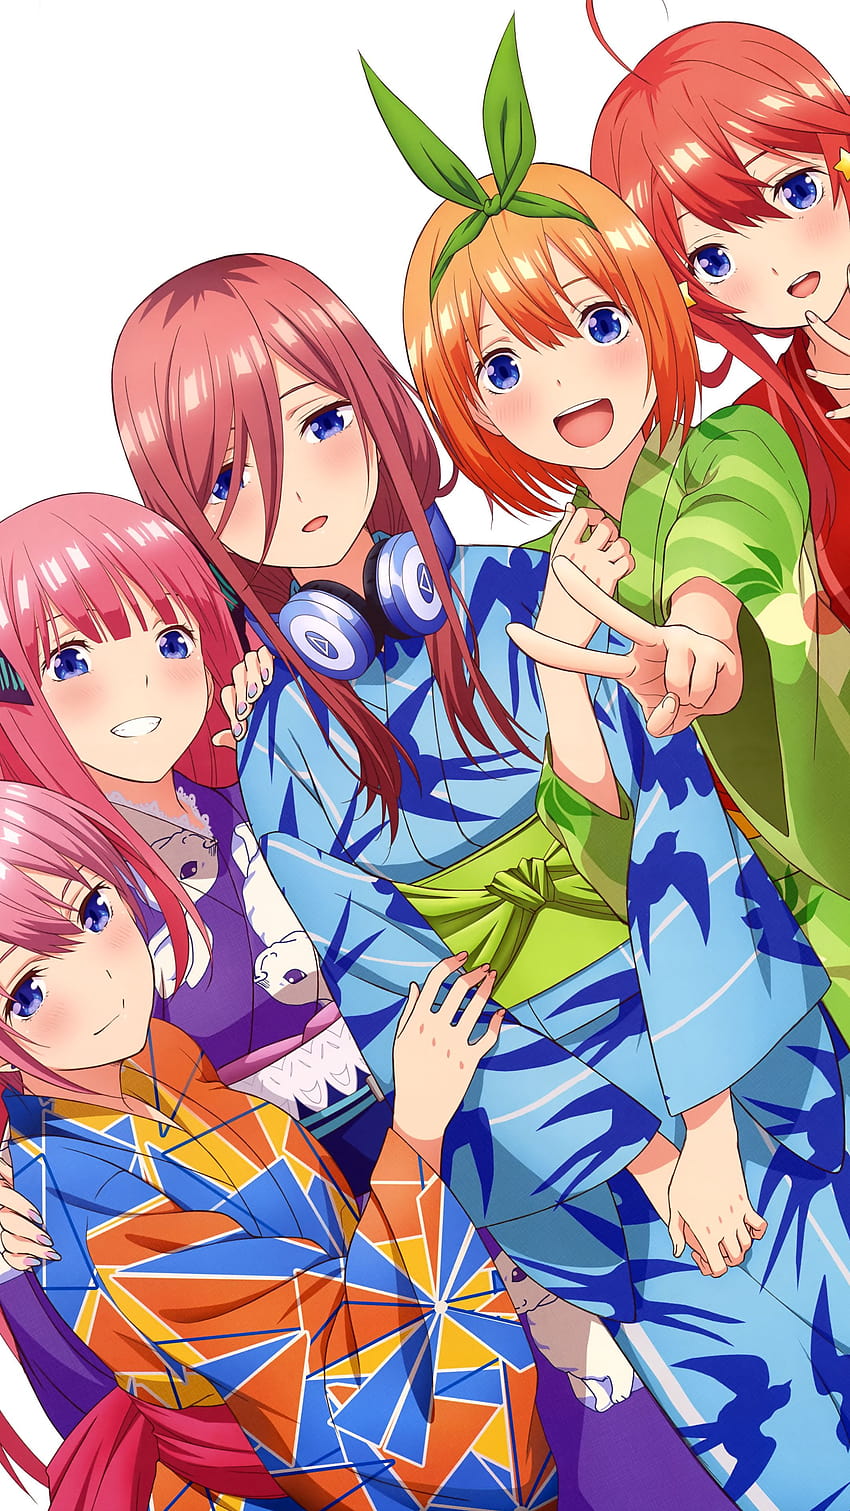 6 Anime Like Gotoubun no Hanayome The Quintessential Quintuplets  Recommendations